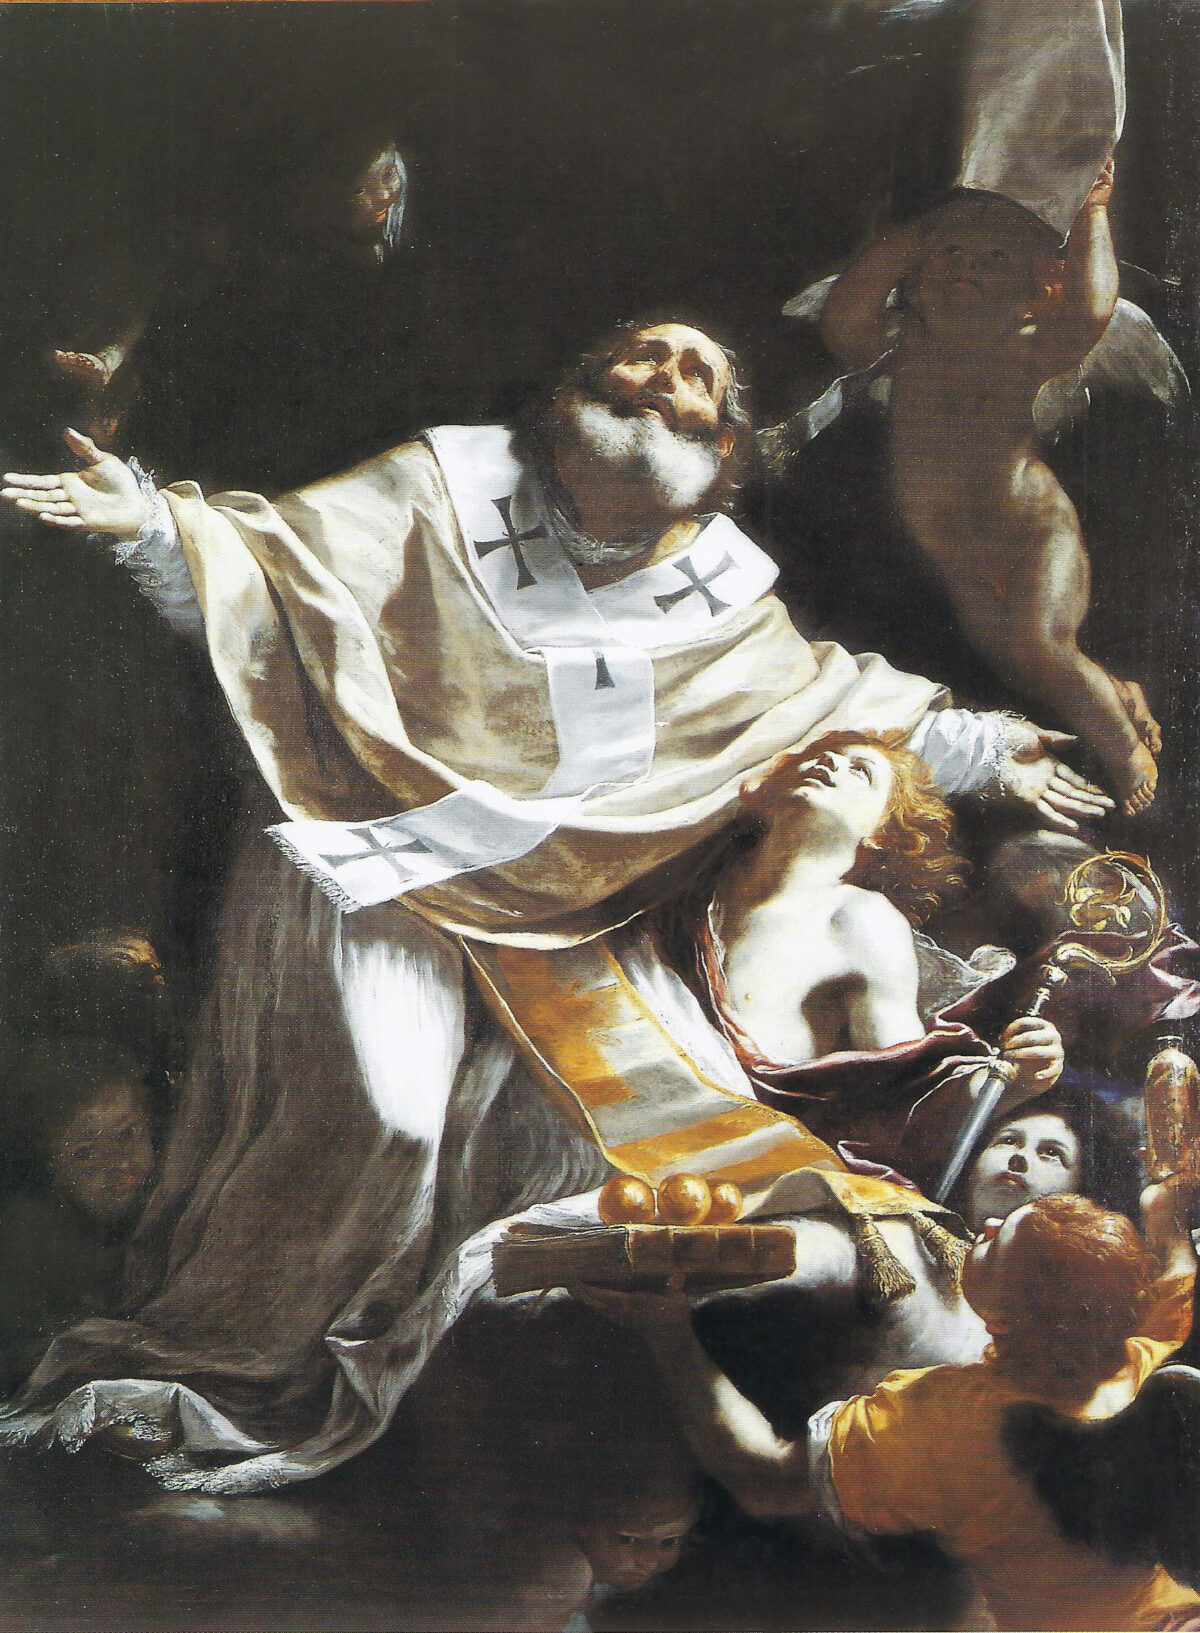 A detail from “Glory of St. Nicholas of Bari,” 1653, by Mattia Preti. Oil on Canvas. Capodimonte Museums and Galleries. (Public Domain)